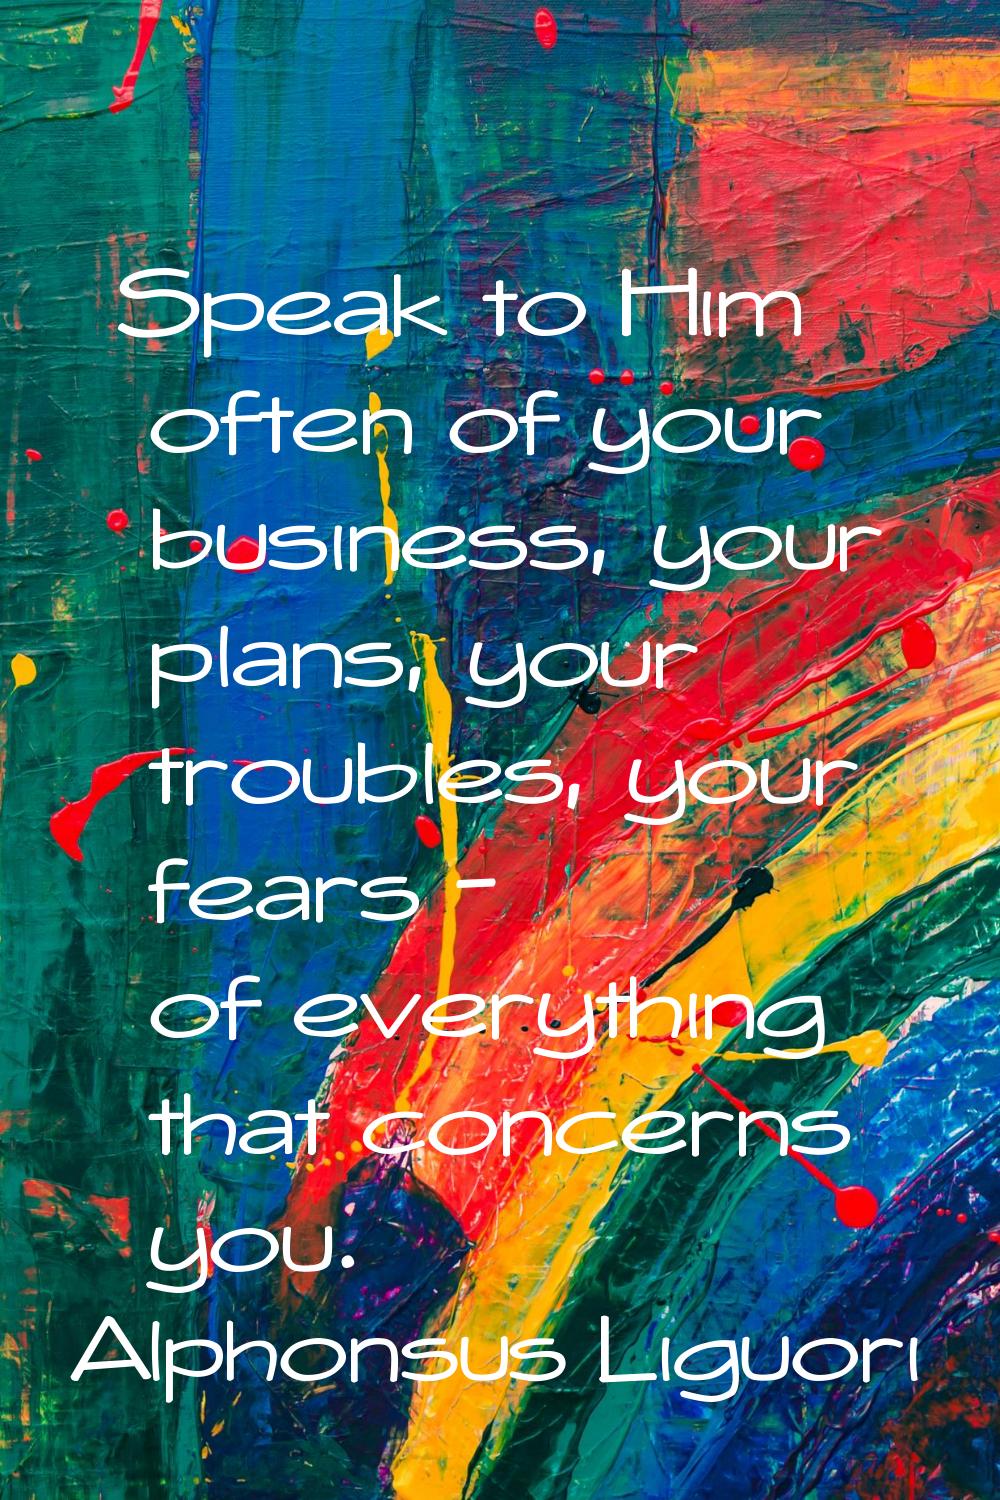 Speak to Him often of your business, your plans, your troubles, your fears - of everything that con